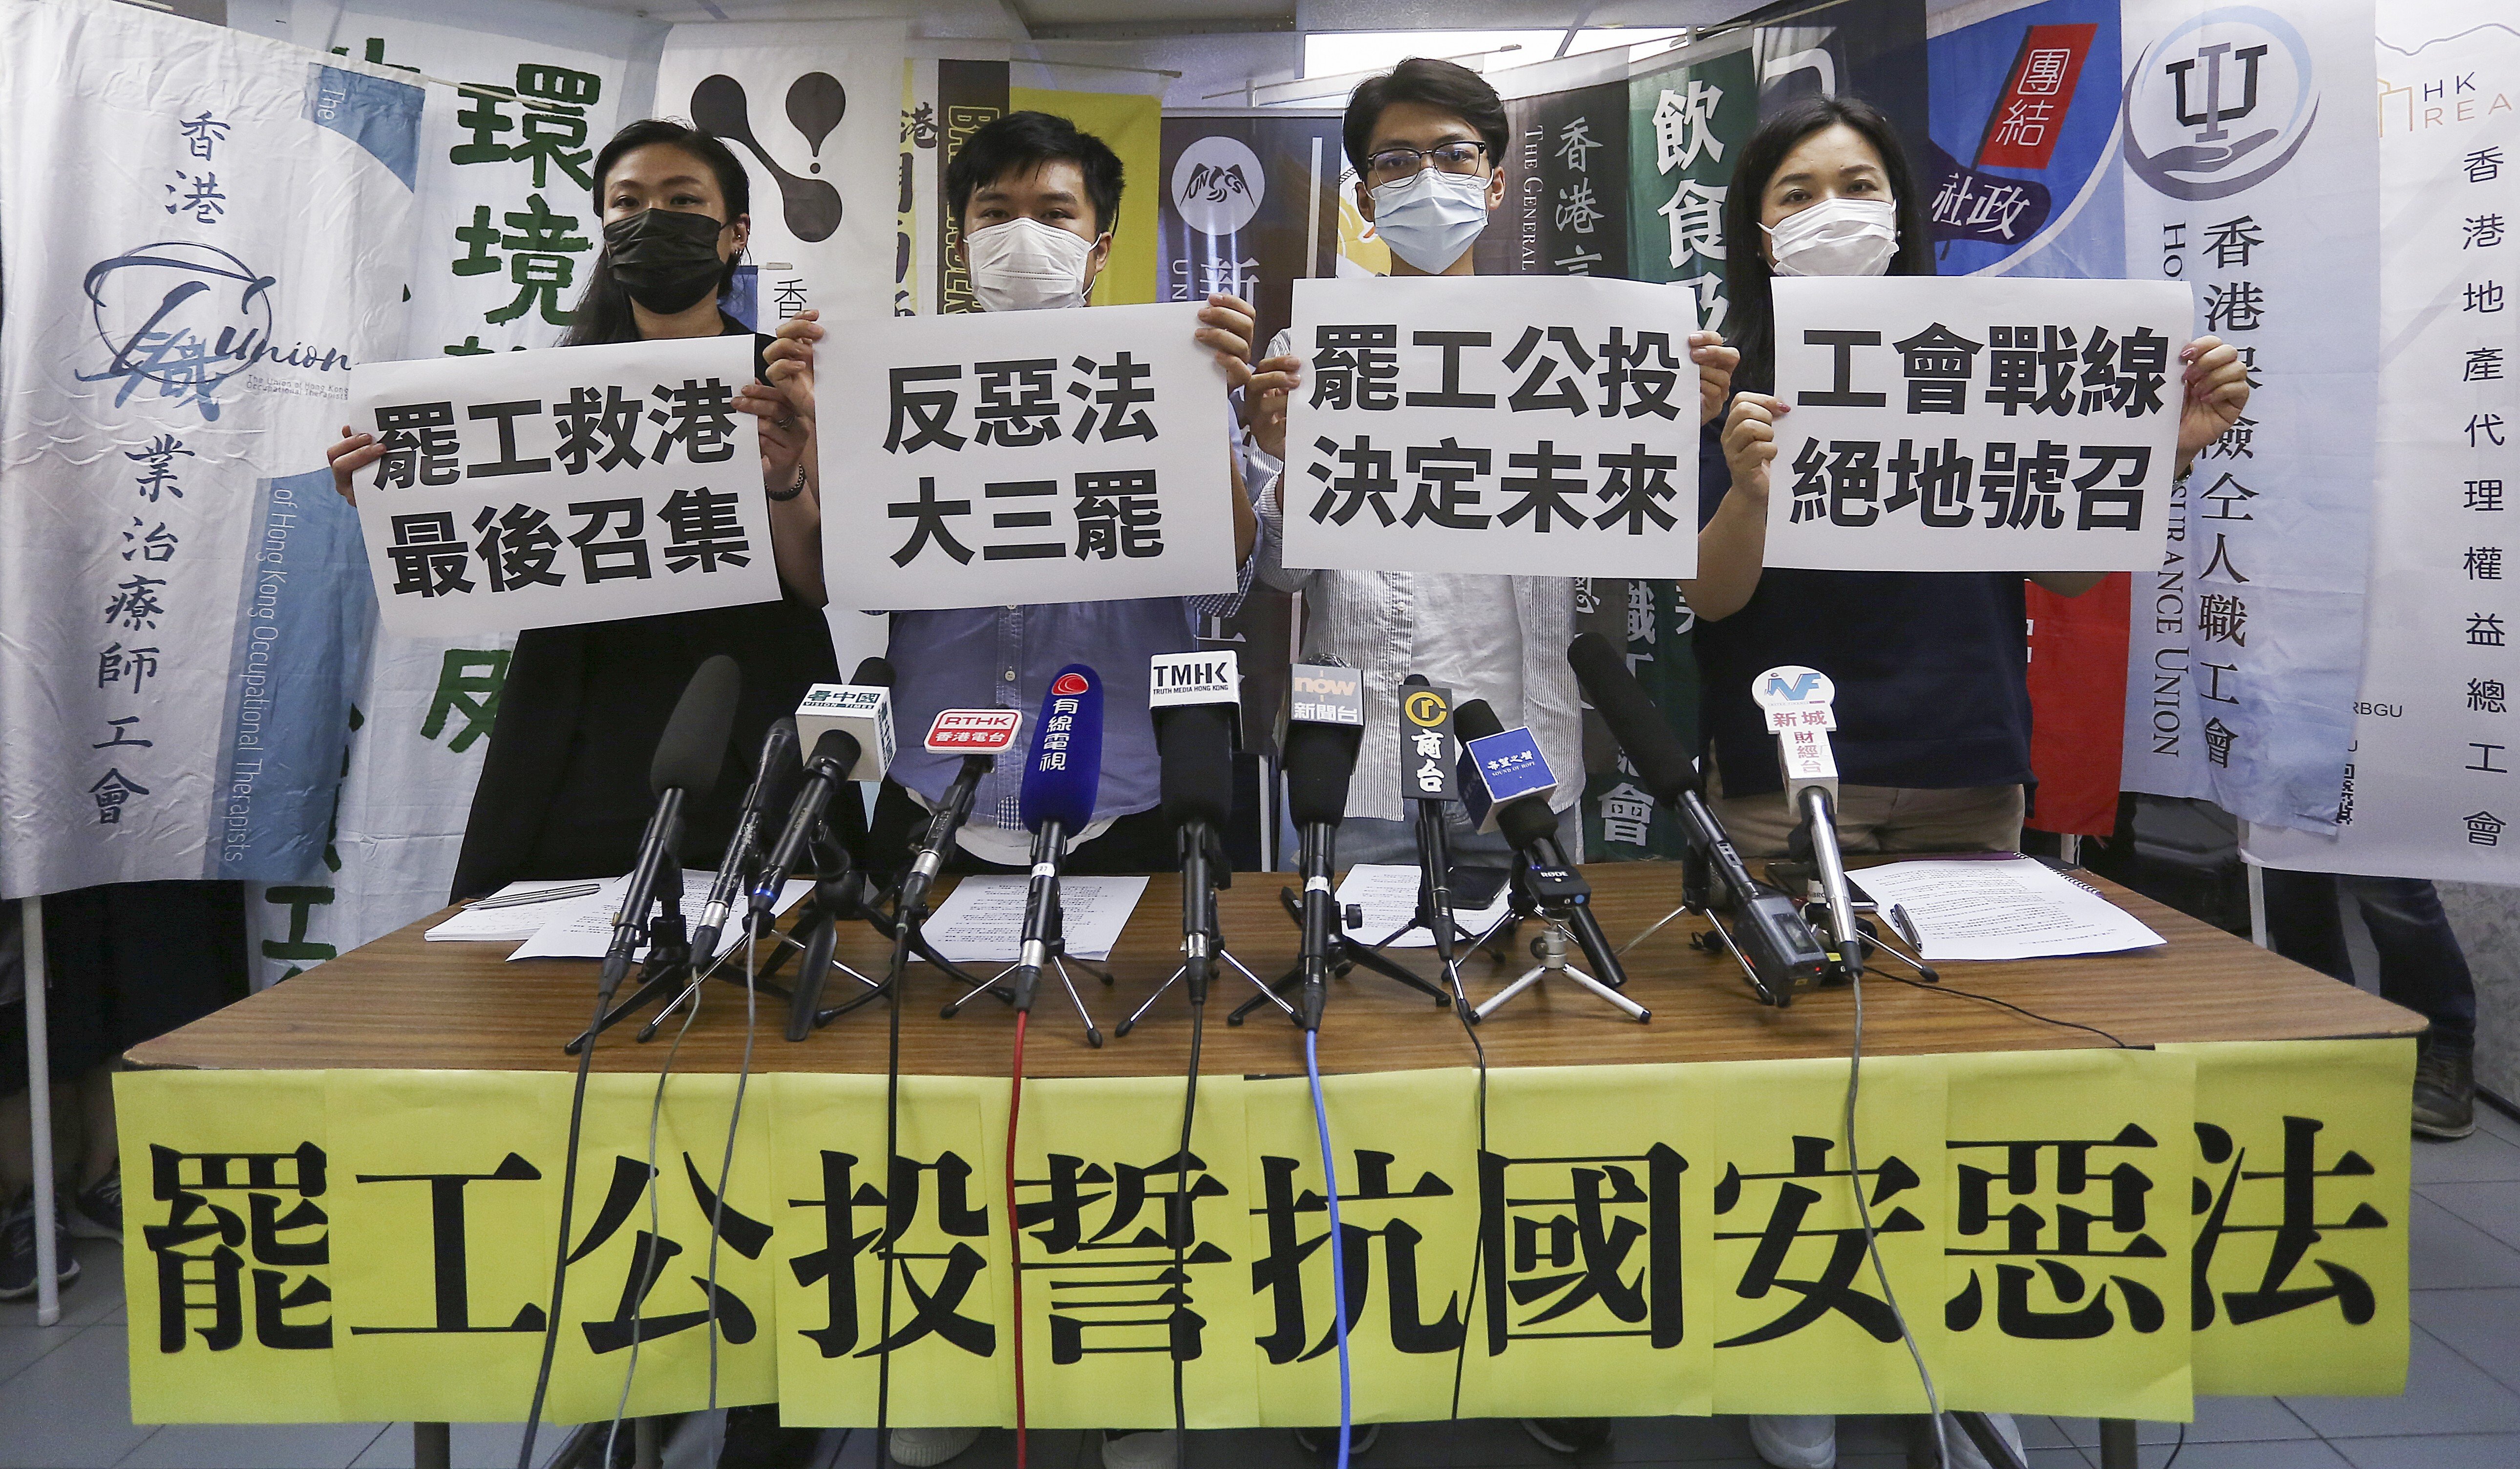 Organisers of the labour strike hold a press briefing, including (left to right) Cat Hou Chui-shan of the Bartenders & Mixologists Union; Alex Tang Cheuk-man of the Hong Kong Information Technology Workers’ Union; Alex Tsui of the Hong Kong Hotel Employees Union and Carol Ng of the Hong Kong Confederation of Trade Union. Photo: Jonathan Wong